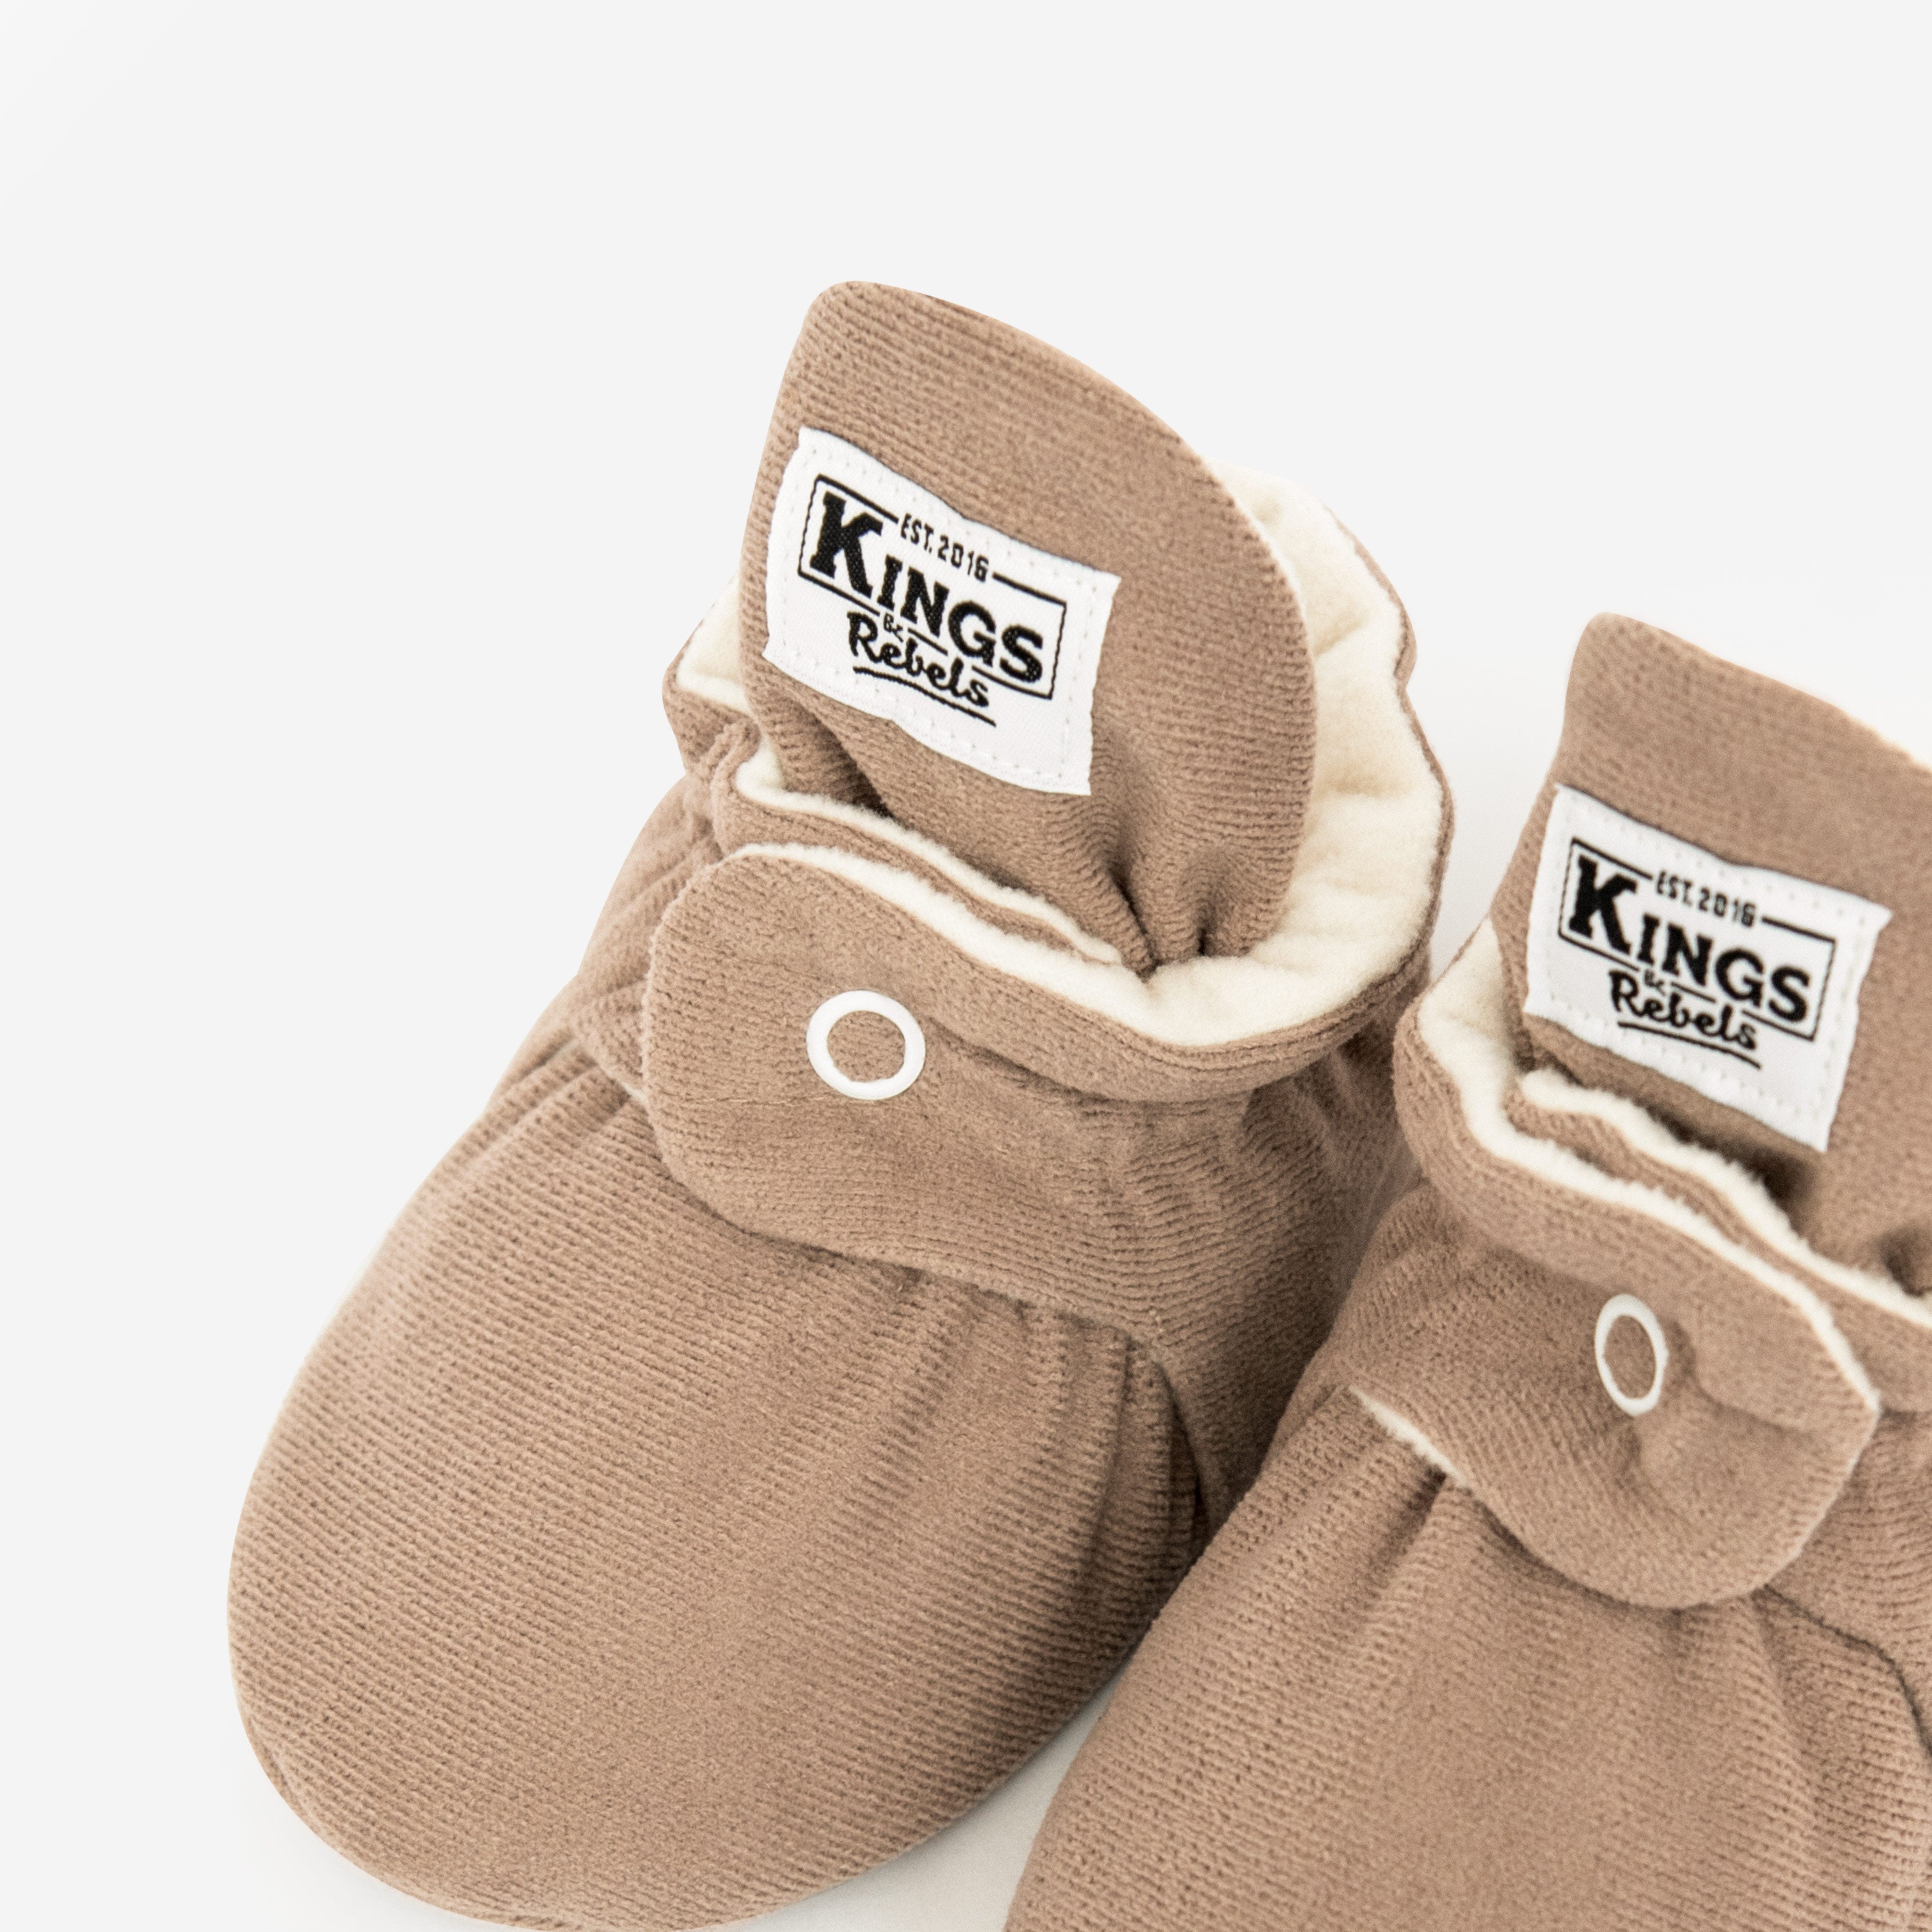 King & Rebels - Gamuza Classic Babyboots in Cafe